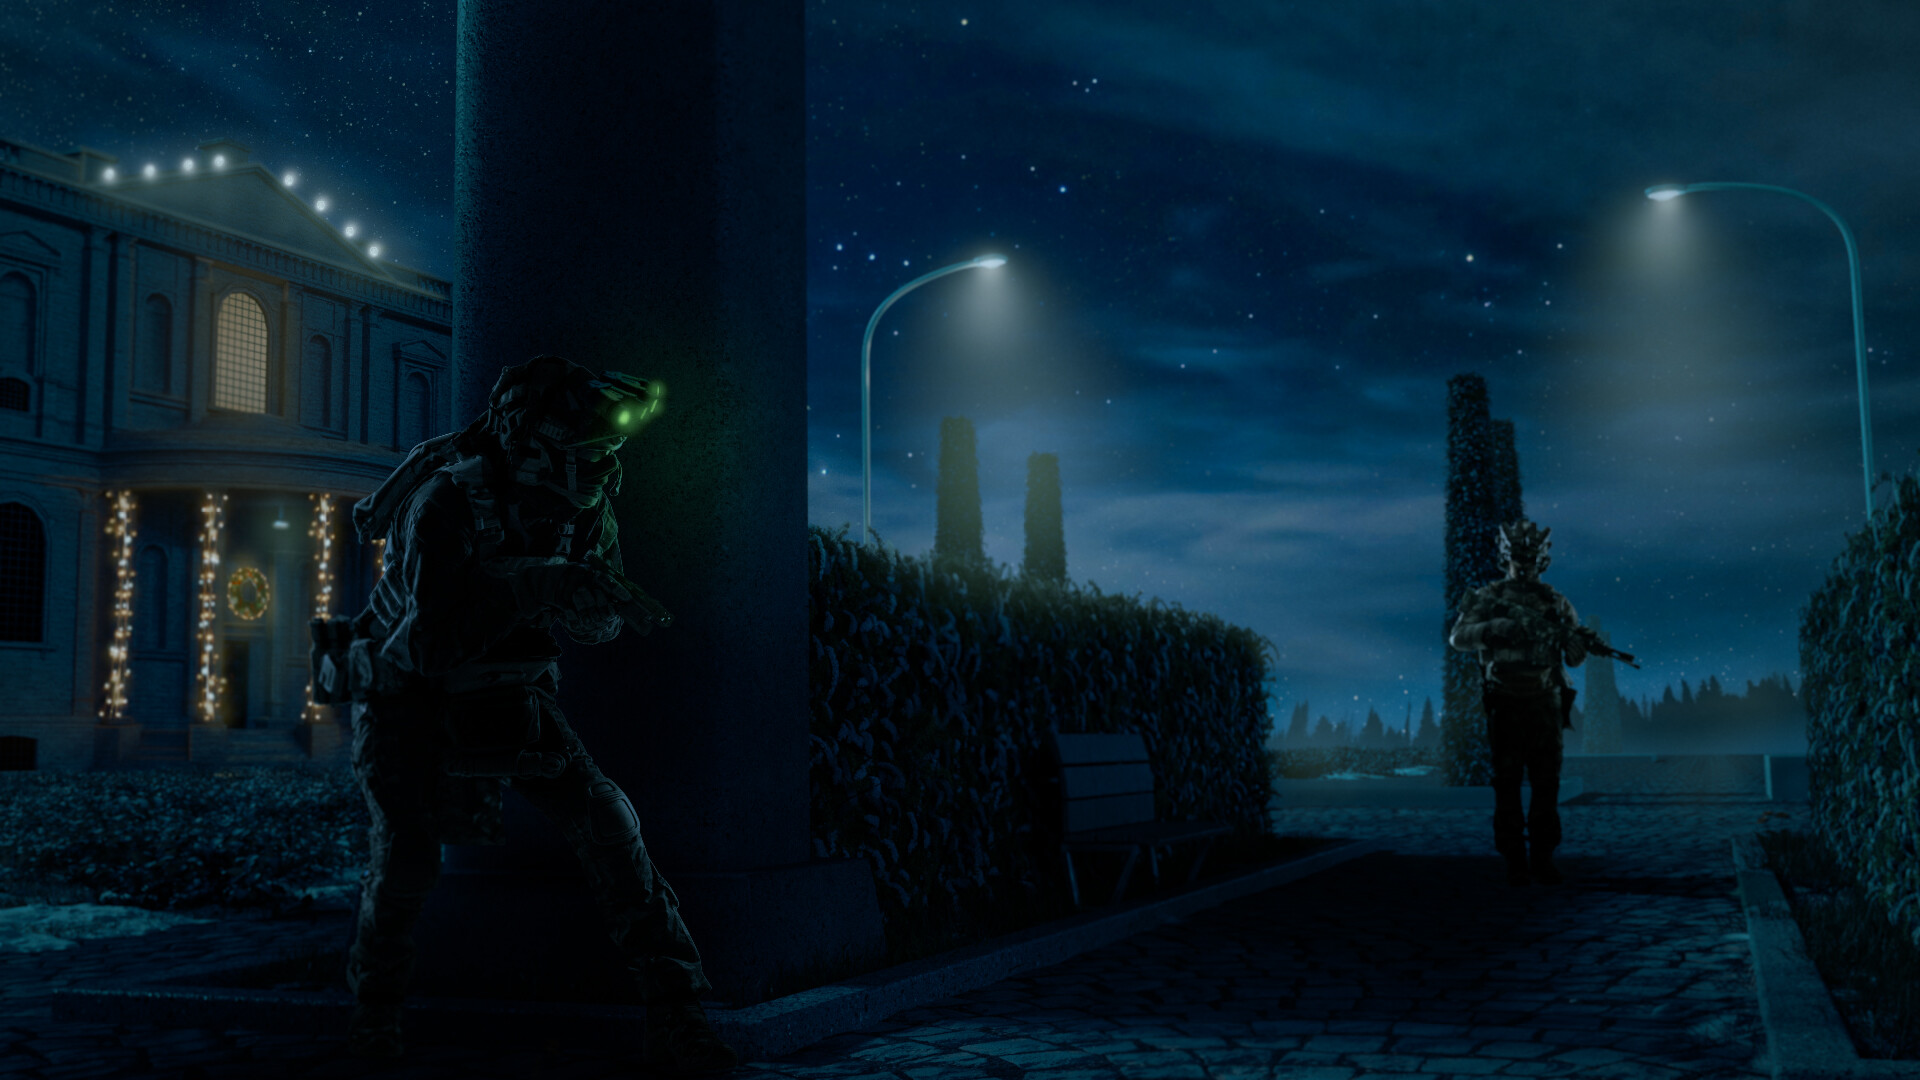 Splinter Cell inspired picture - Finished Projects - Blender